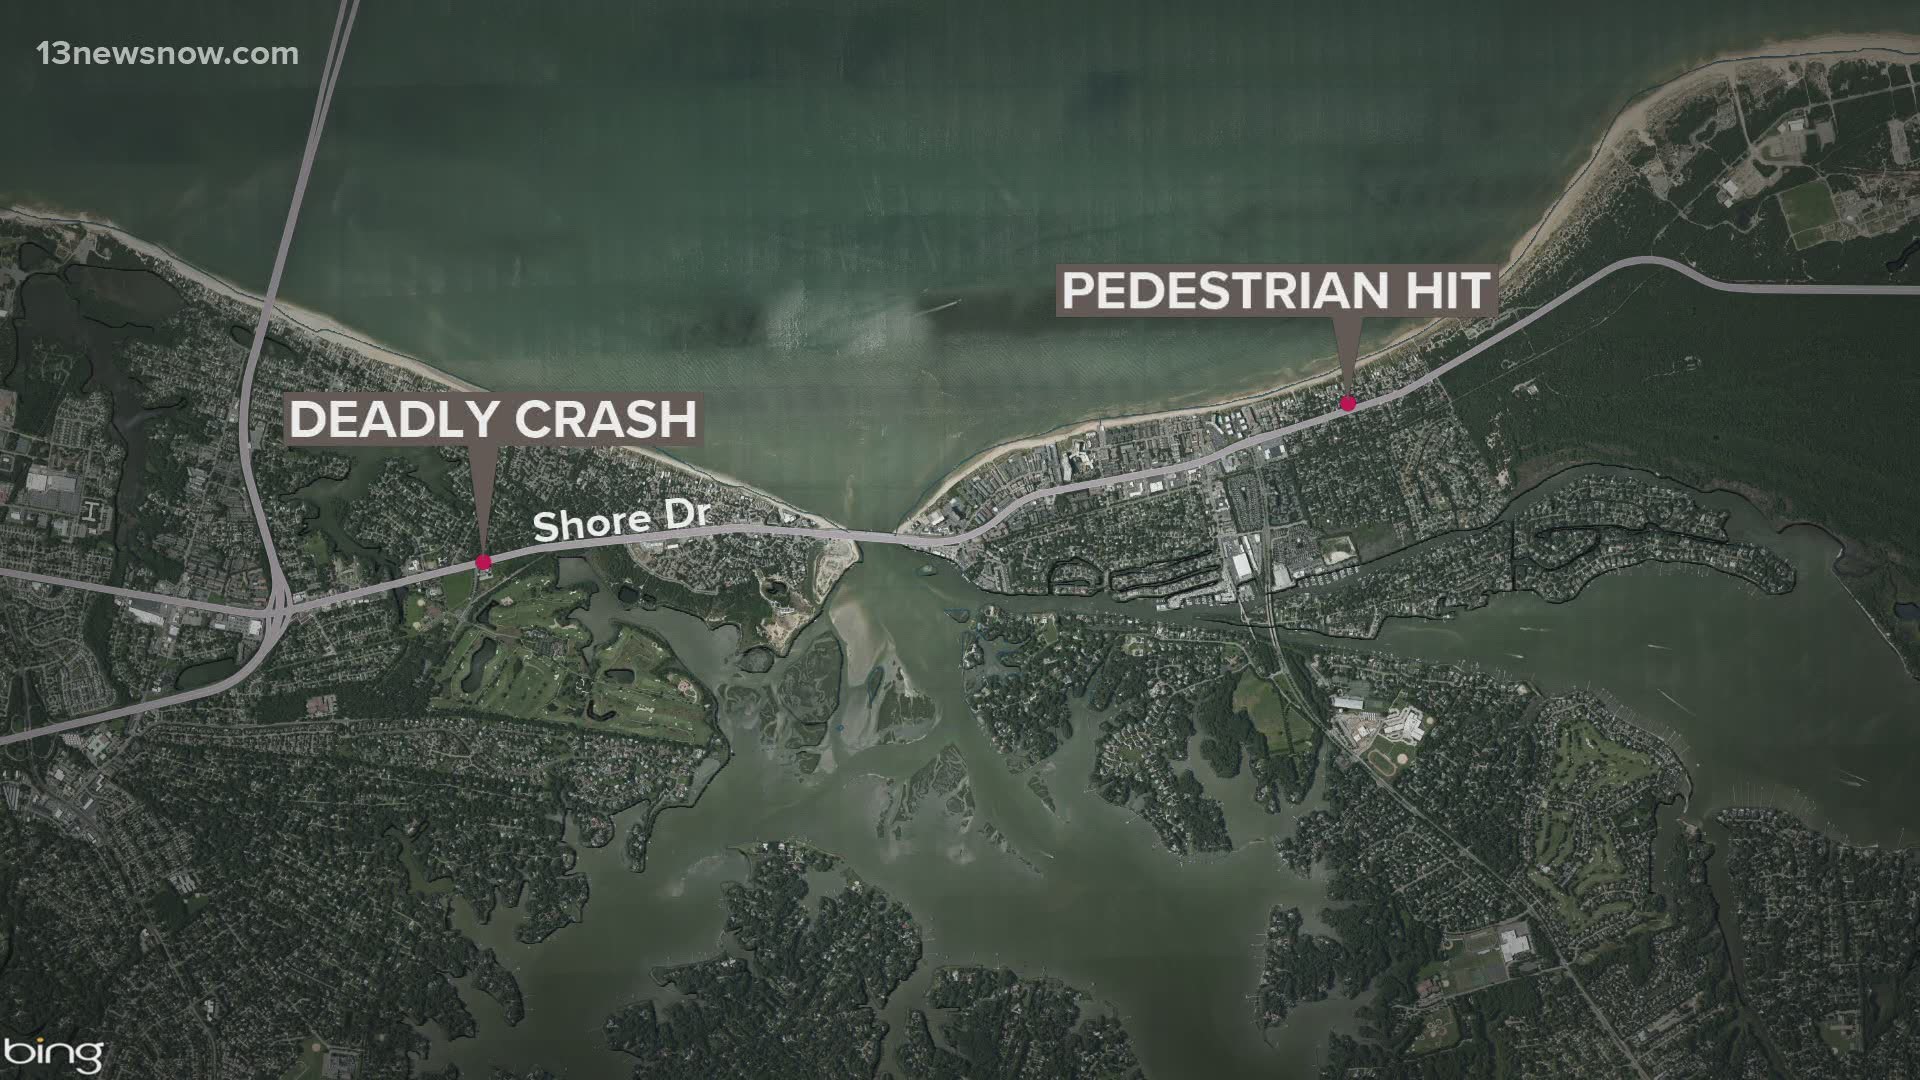 The first crash was deadly. The second collision involved a trash truck.